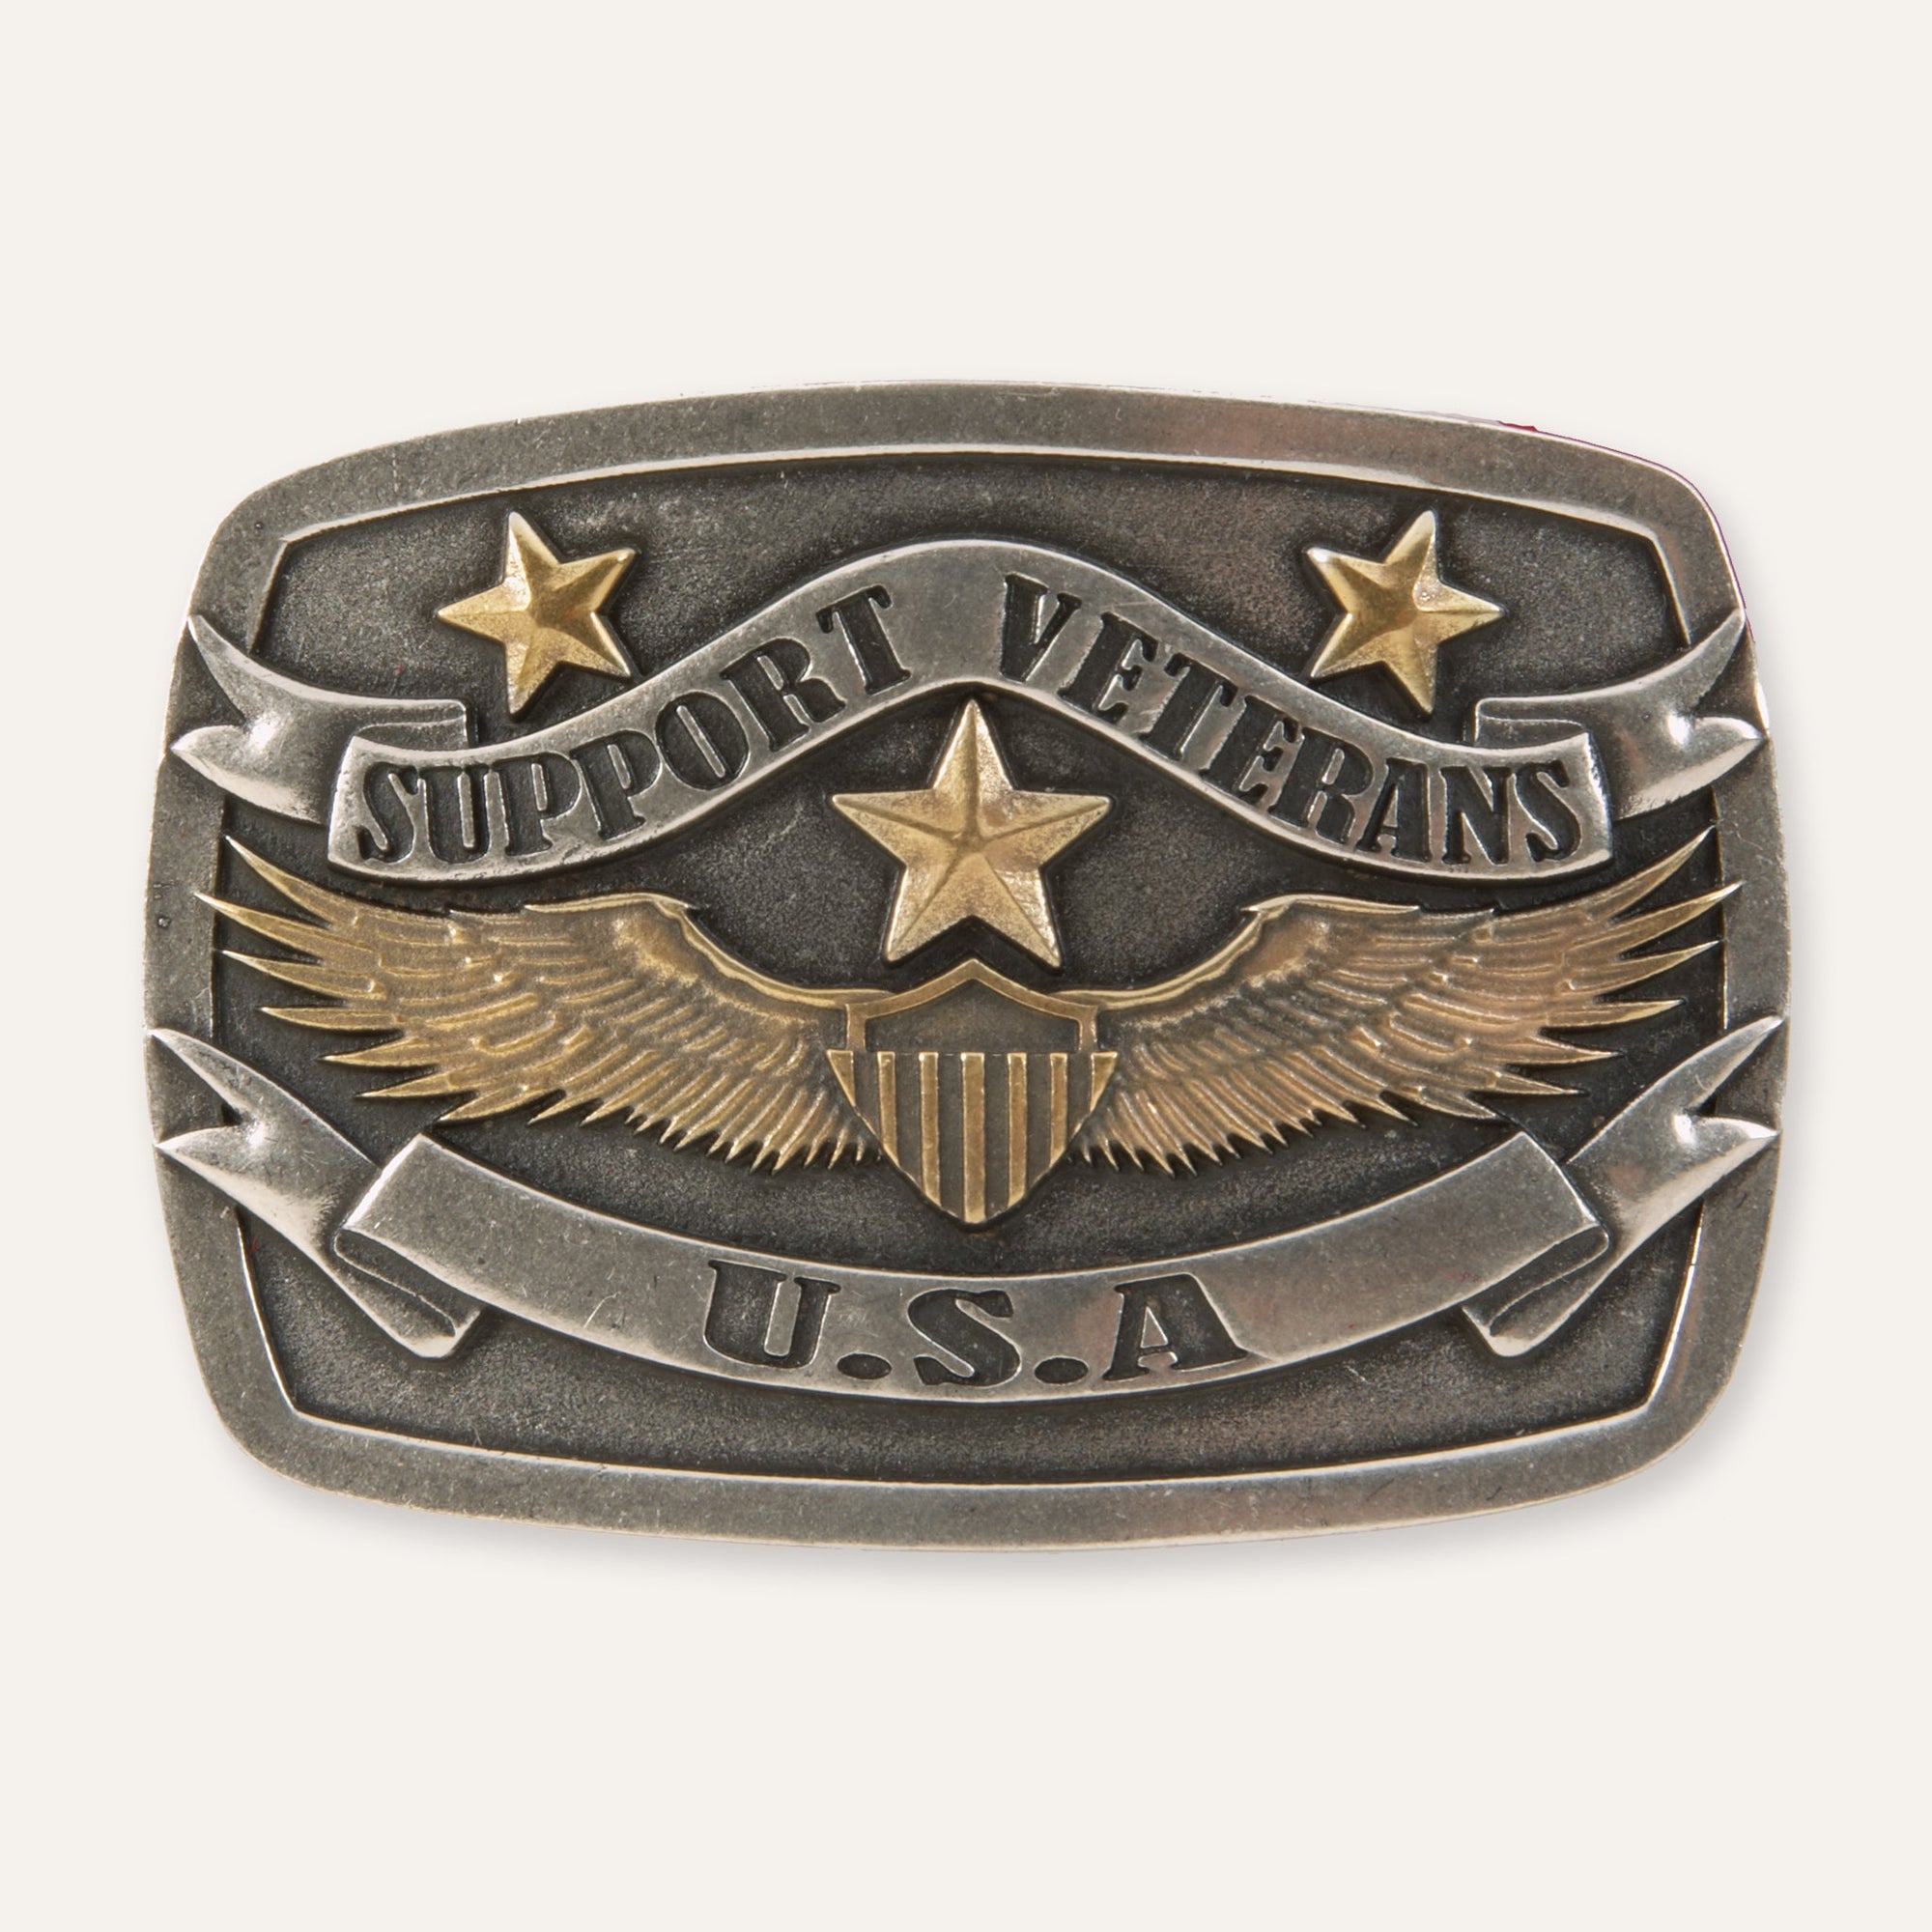 Support Veterans USA Buckle